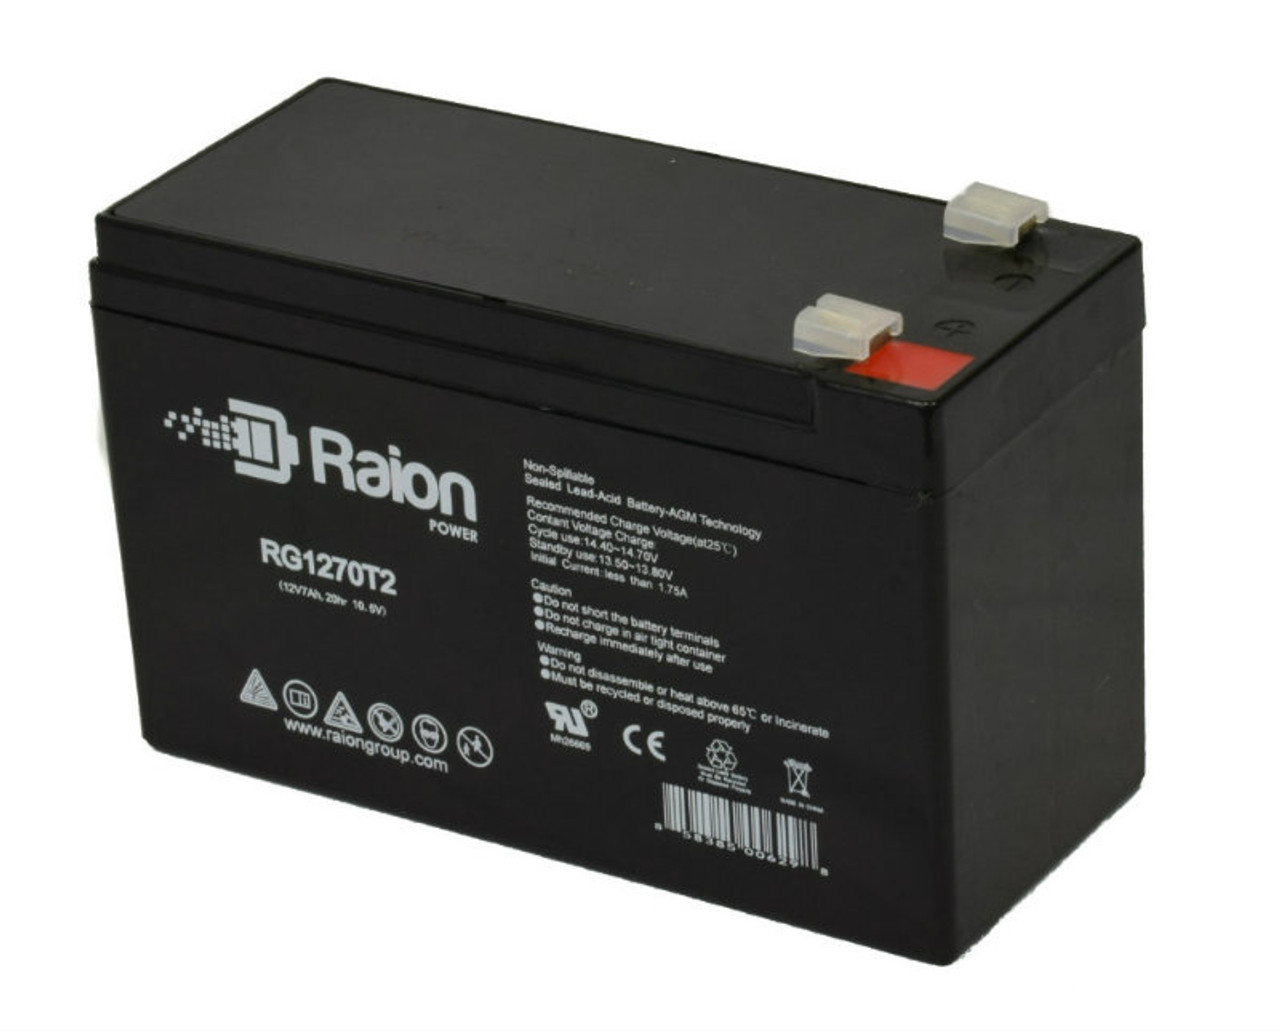 Raion Power RG1270T1 12V 7Ah Non-Spillable Replacement Battery for Volta VT1207